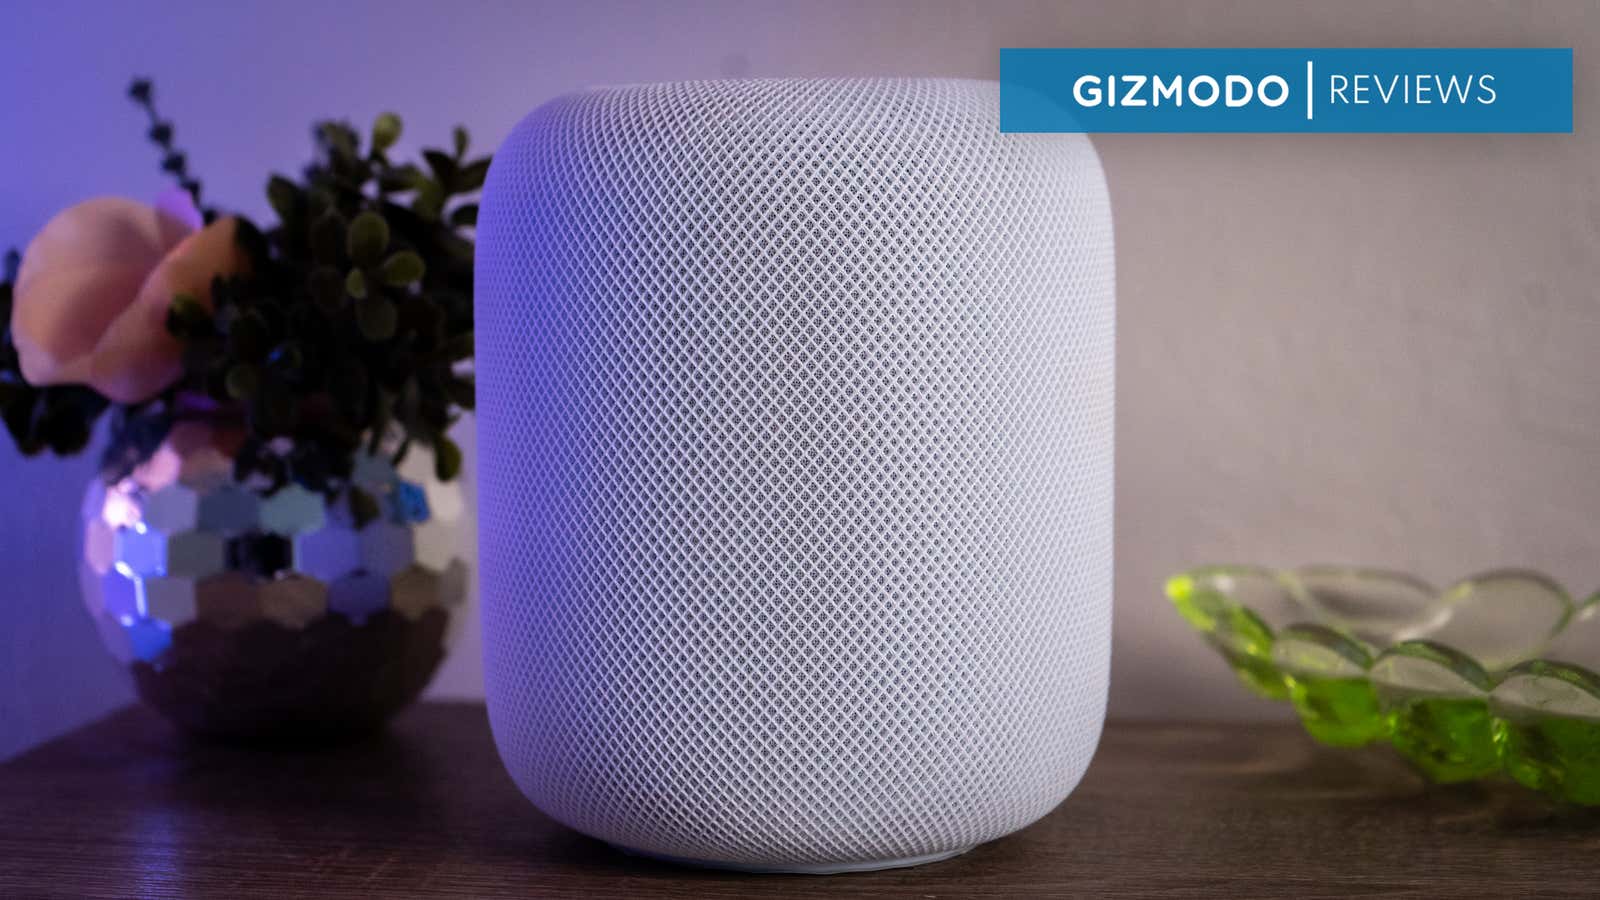 Apple outs $99 HomePod Mini with big sound and Siri smarts -   news